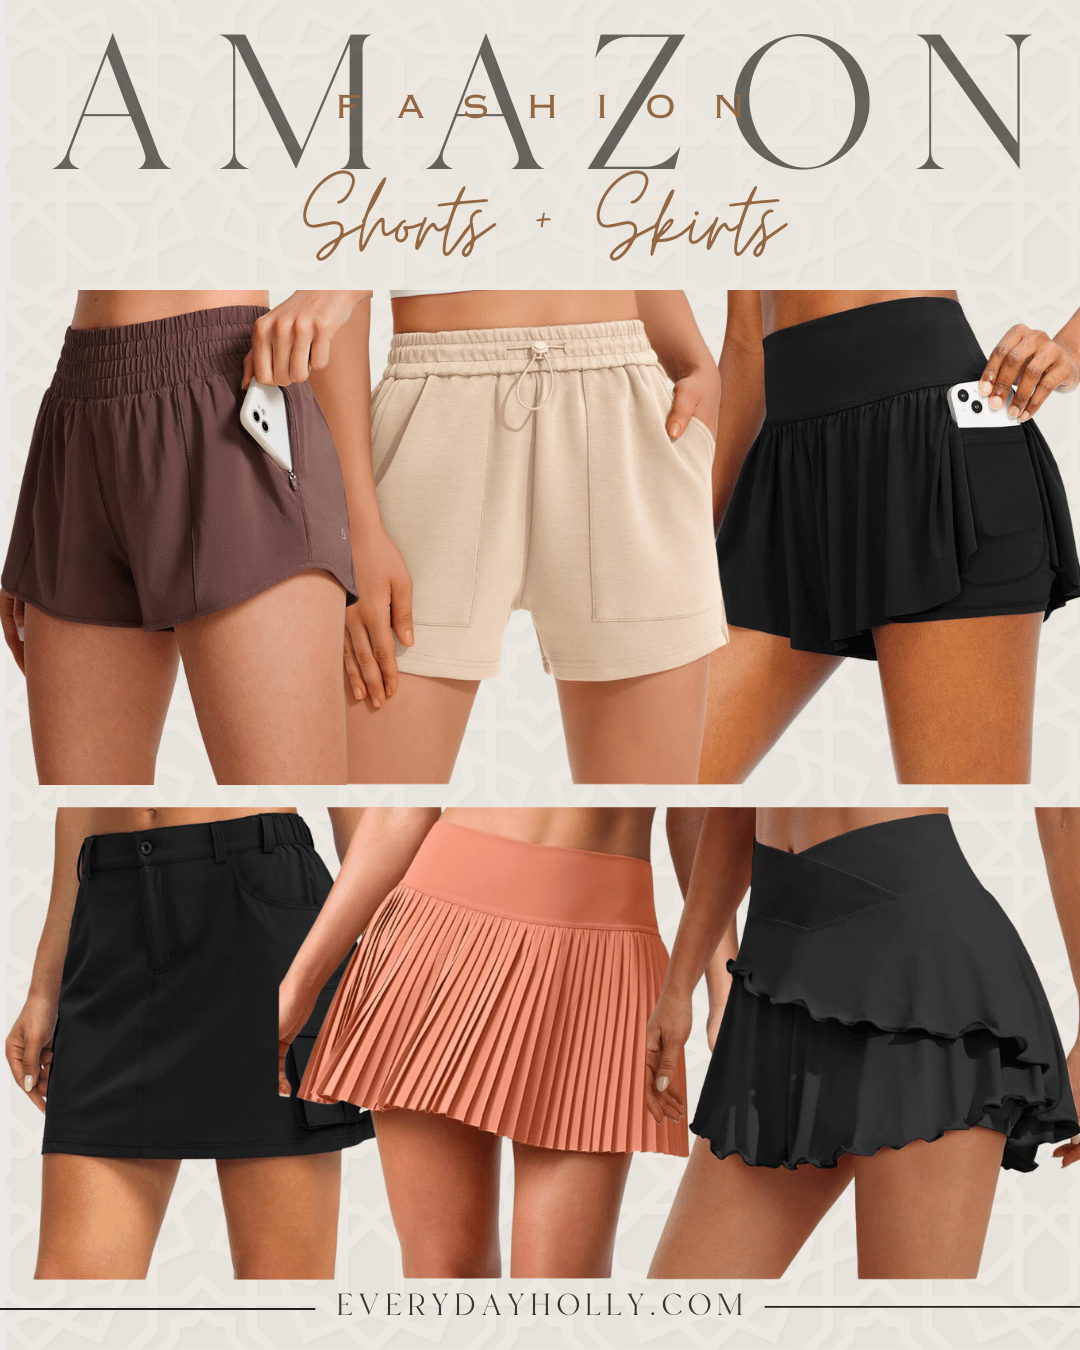 new and trending activewear + athleisure styles amazon | activewear, athleisure, workout clothes, gym outfit, gym clothes, amazon fashion, shorts, skirts, tennis skirt, pleated skirt, loungewear